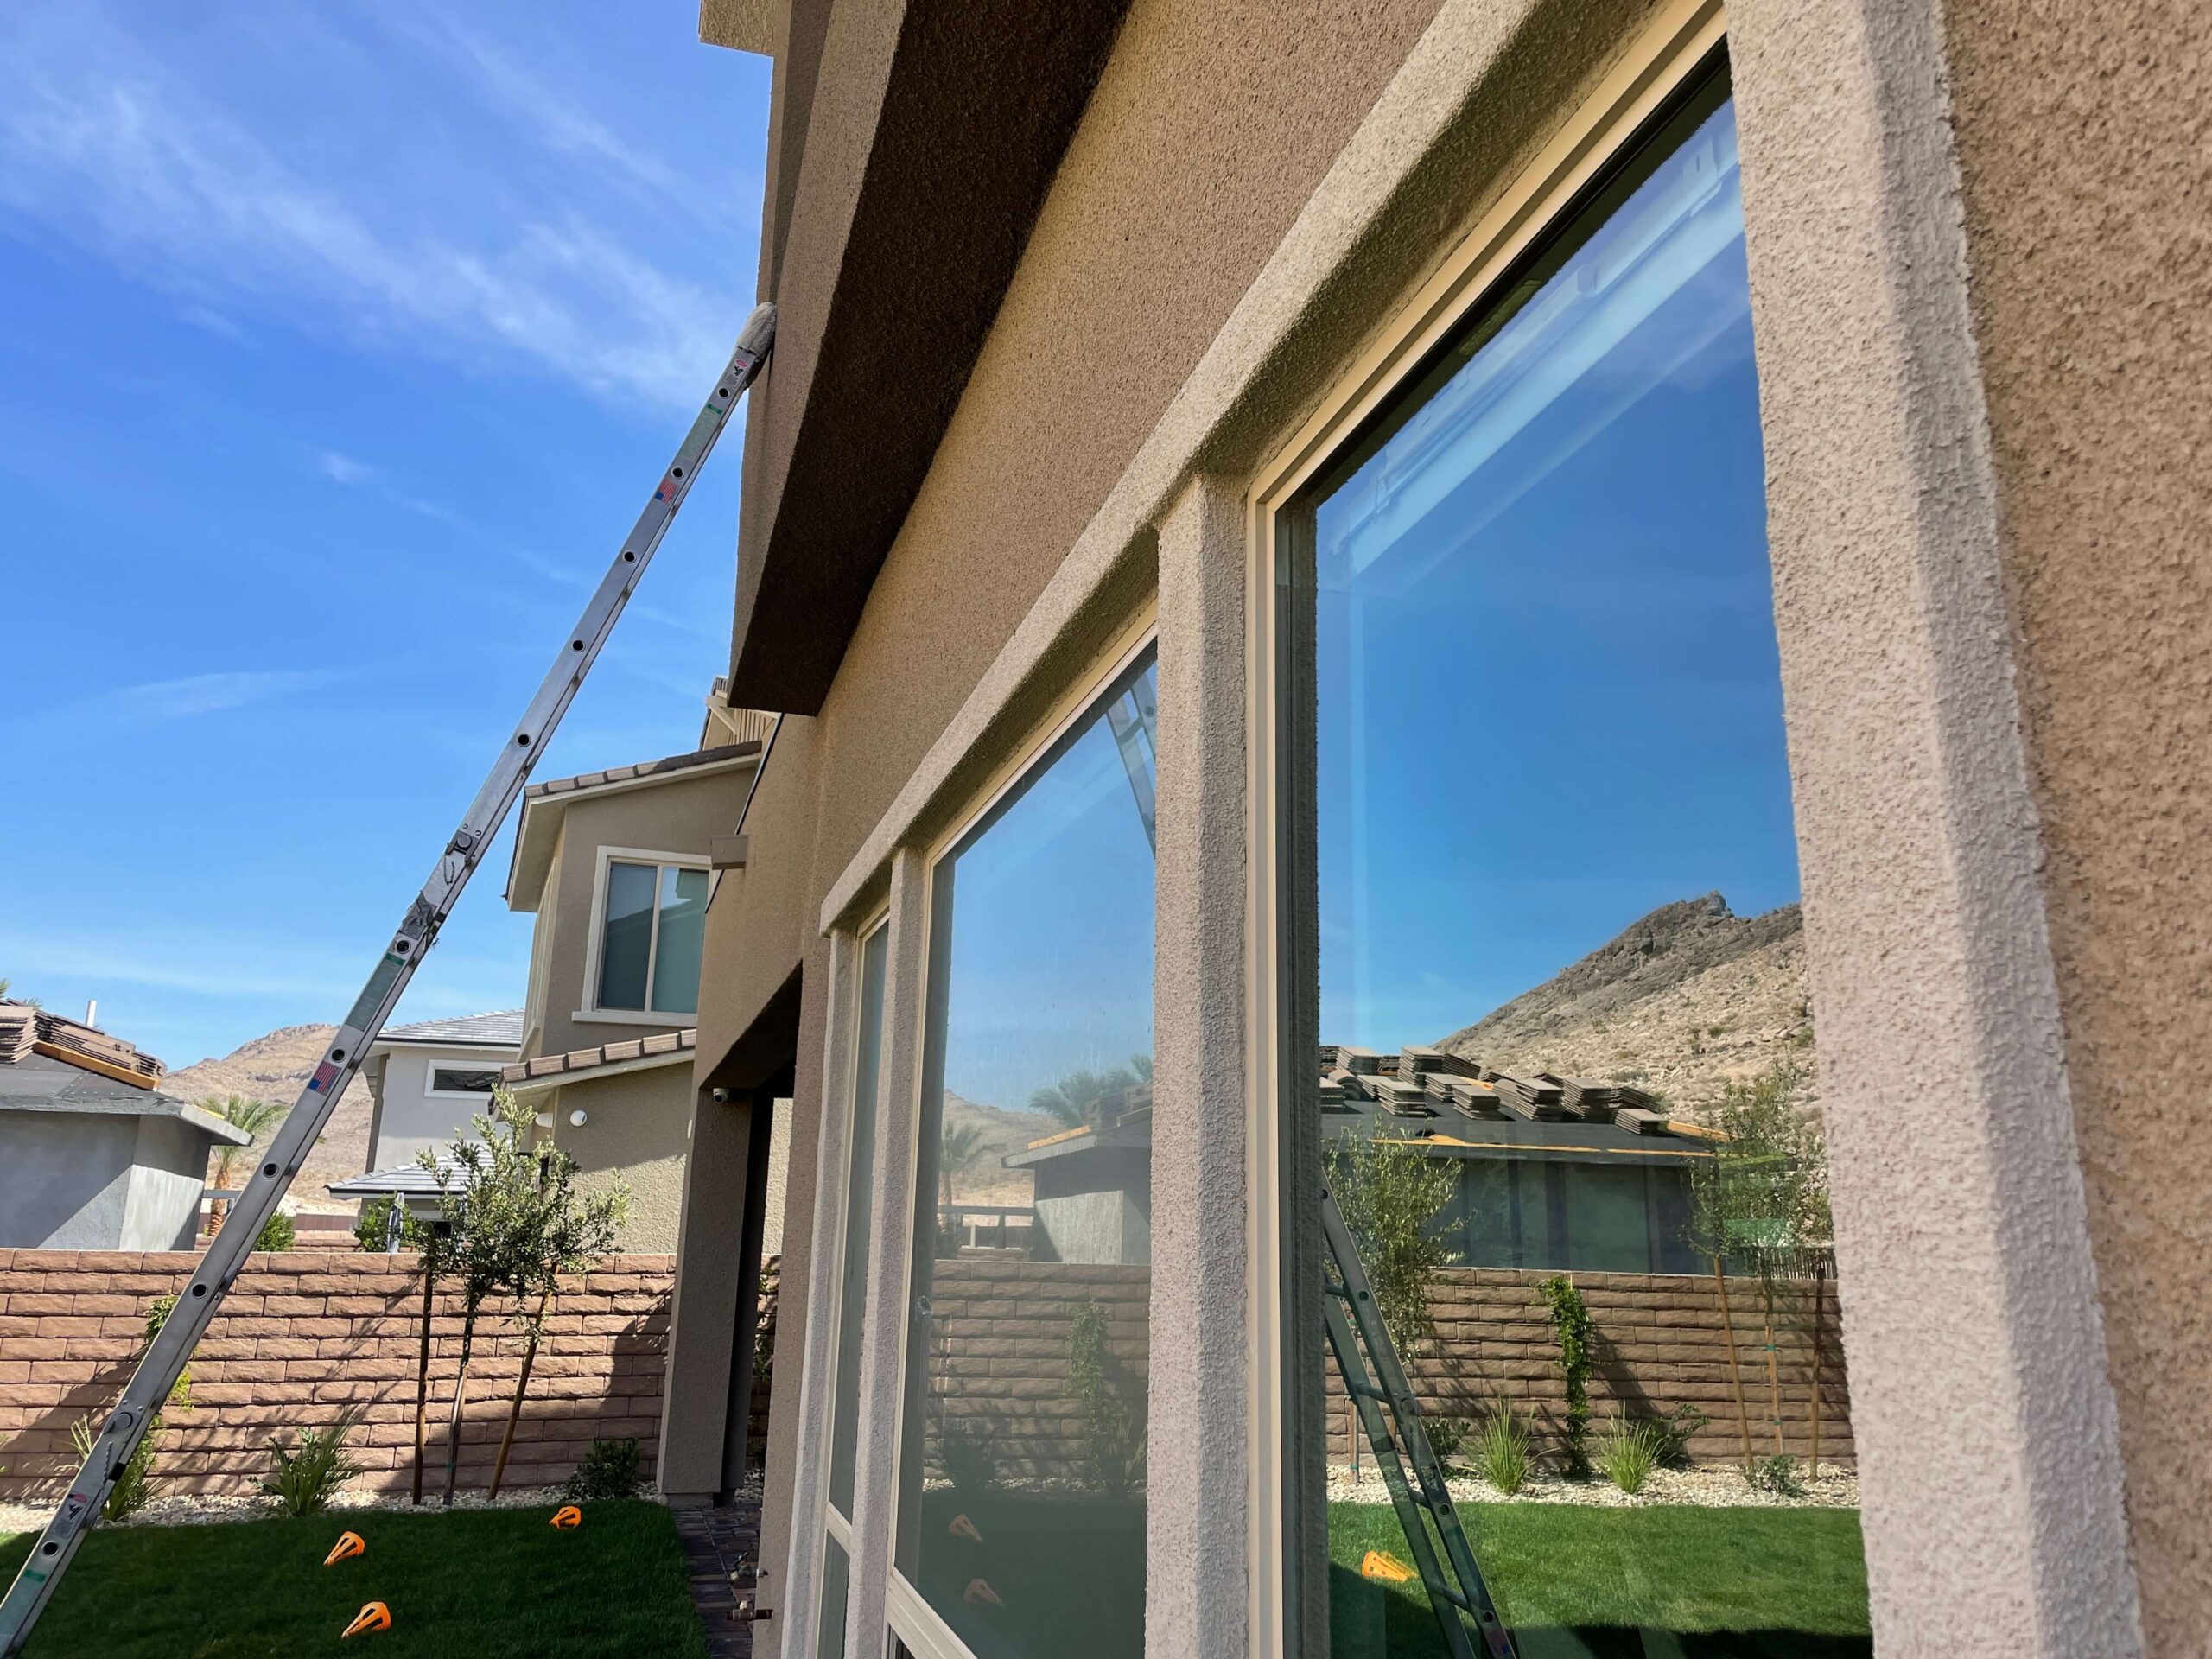 Exterior Window Cleaning